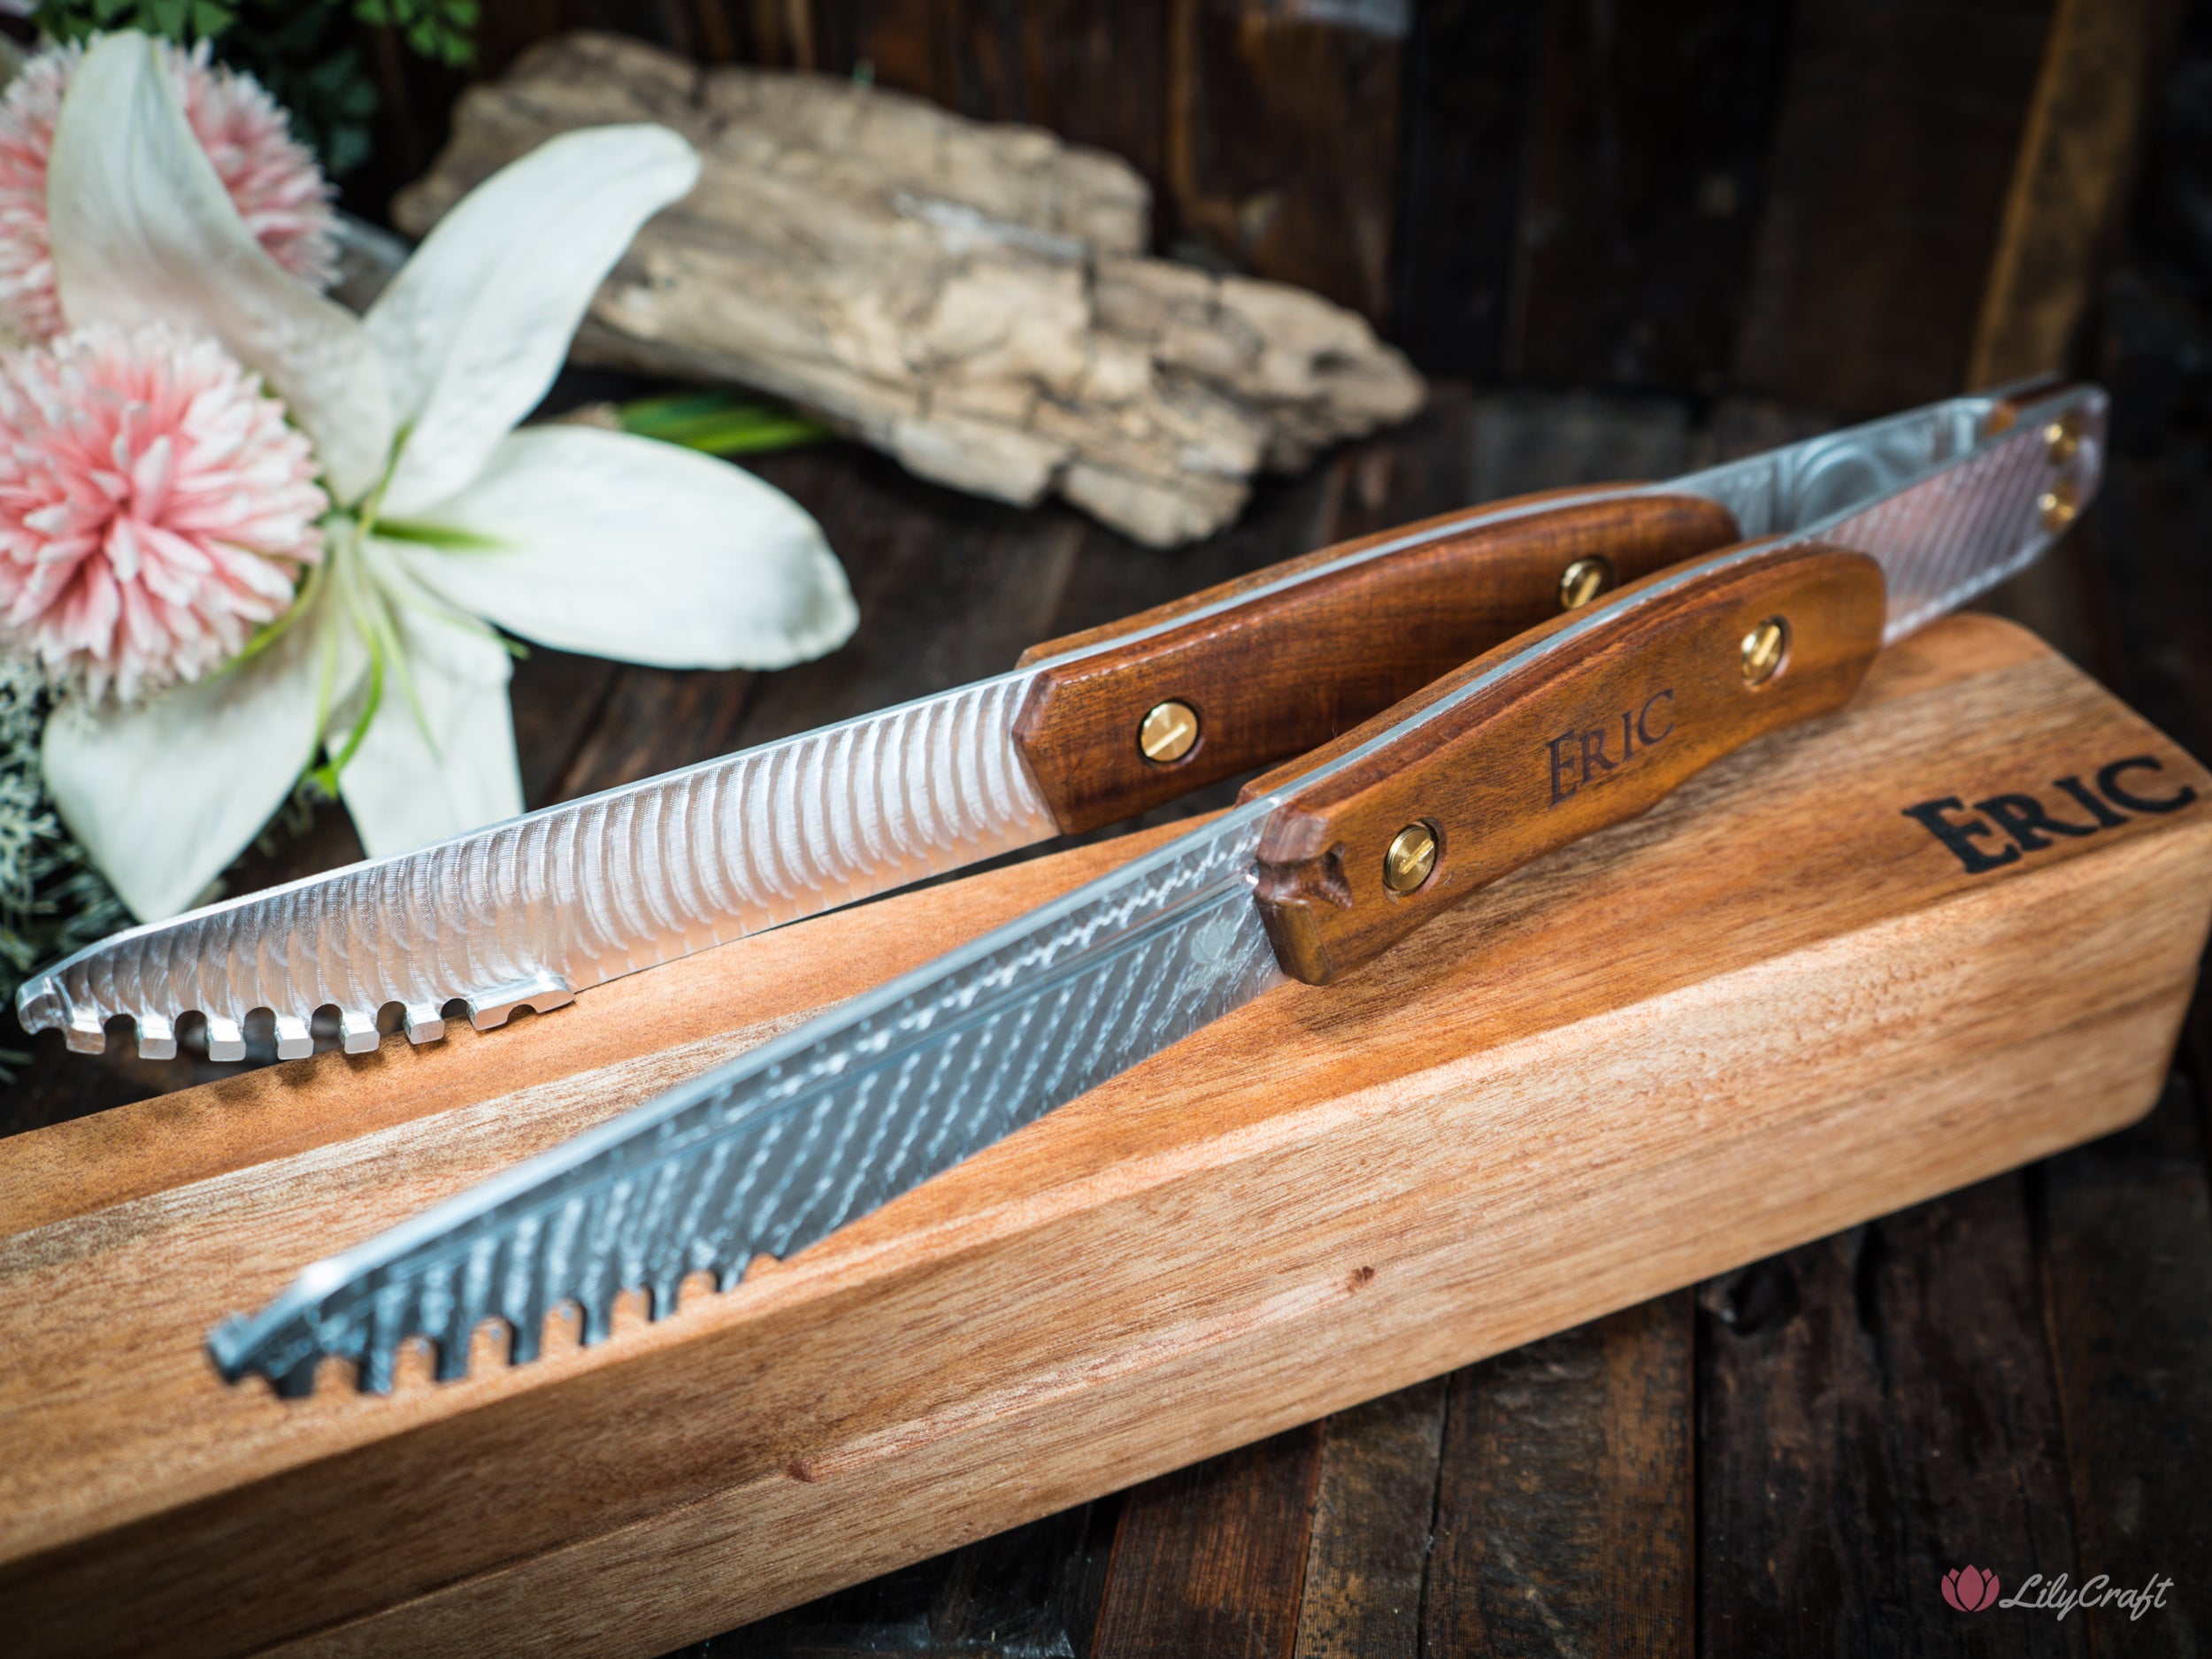 Personalised grilling tools for Dad - custom engraved BBQ tongs with gift case.